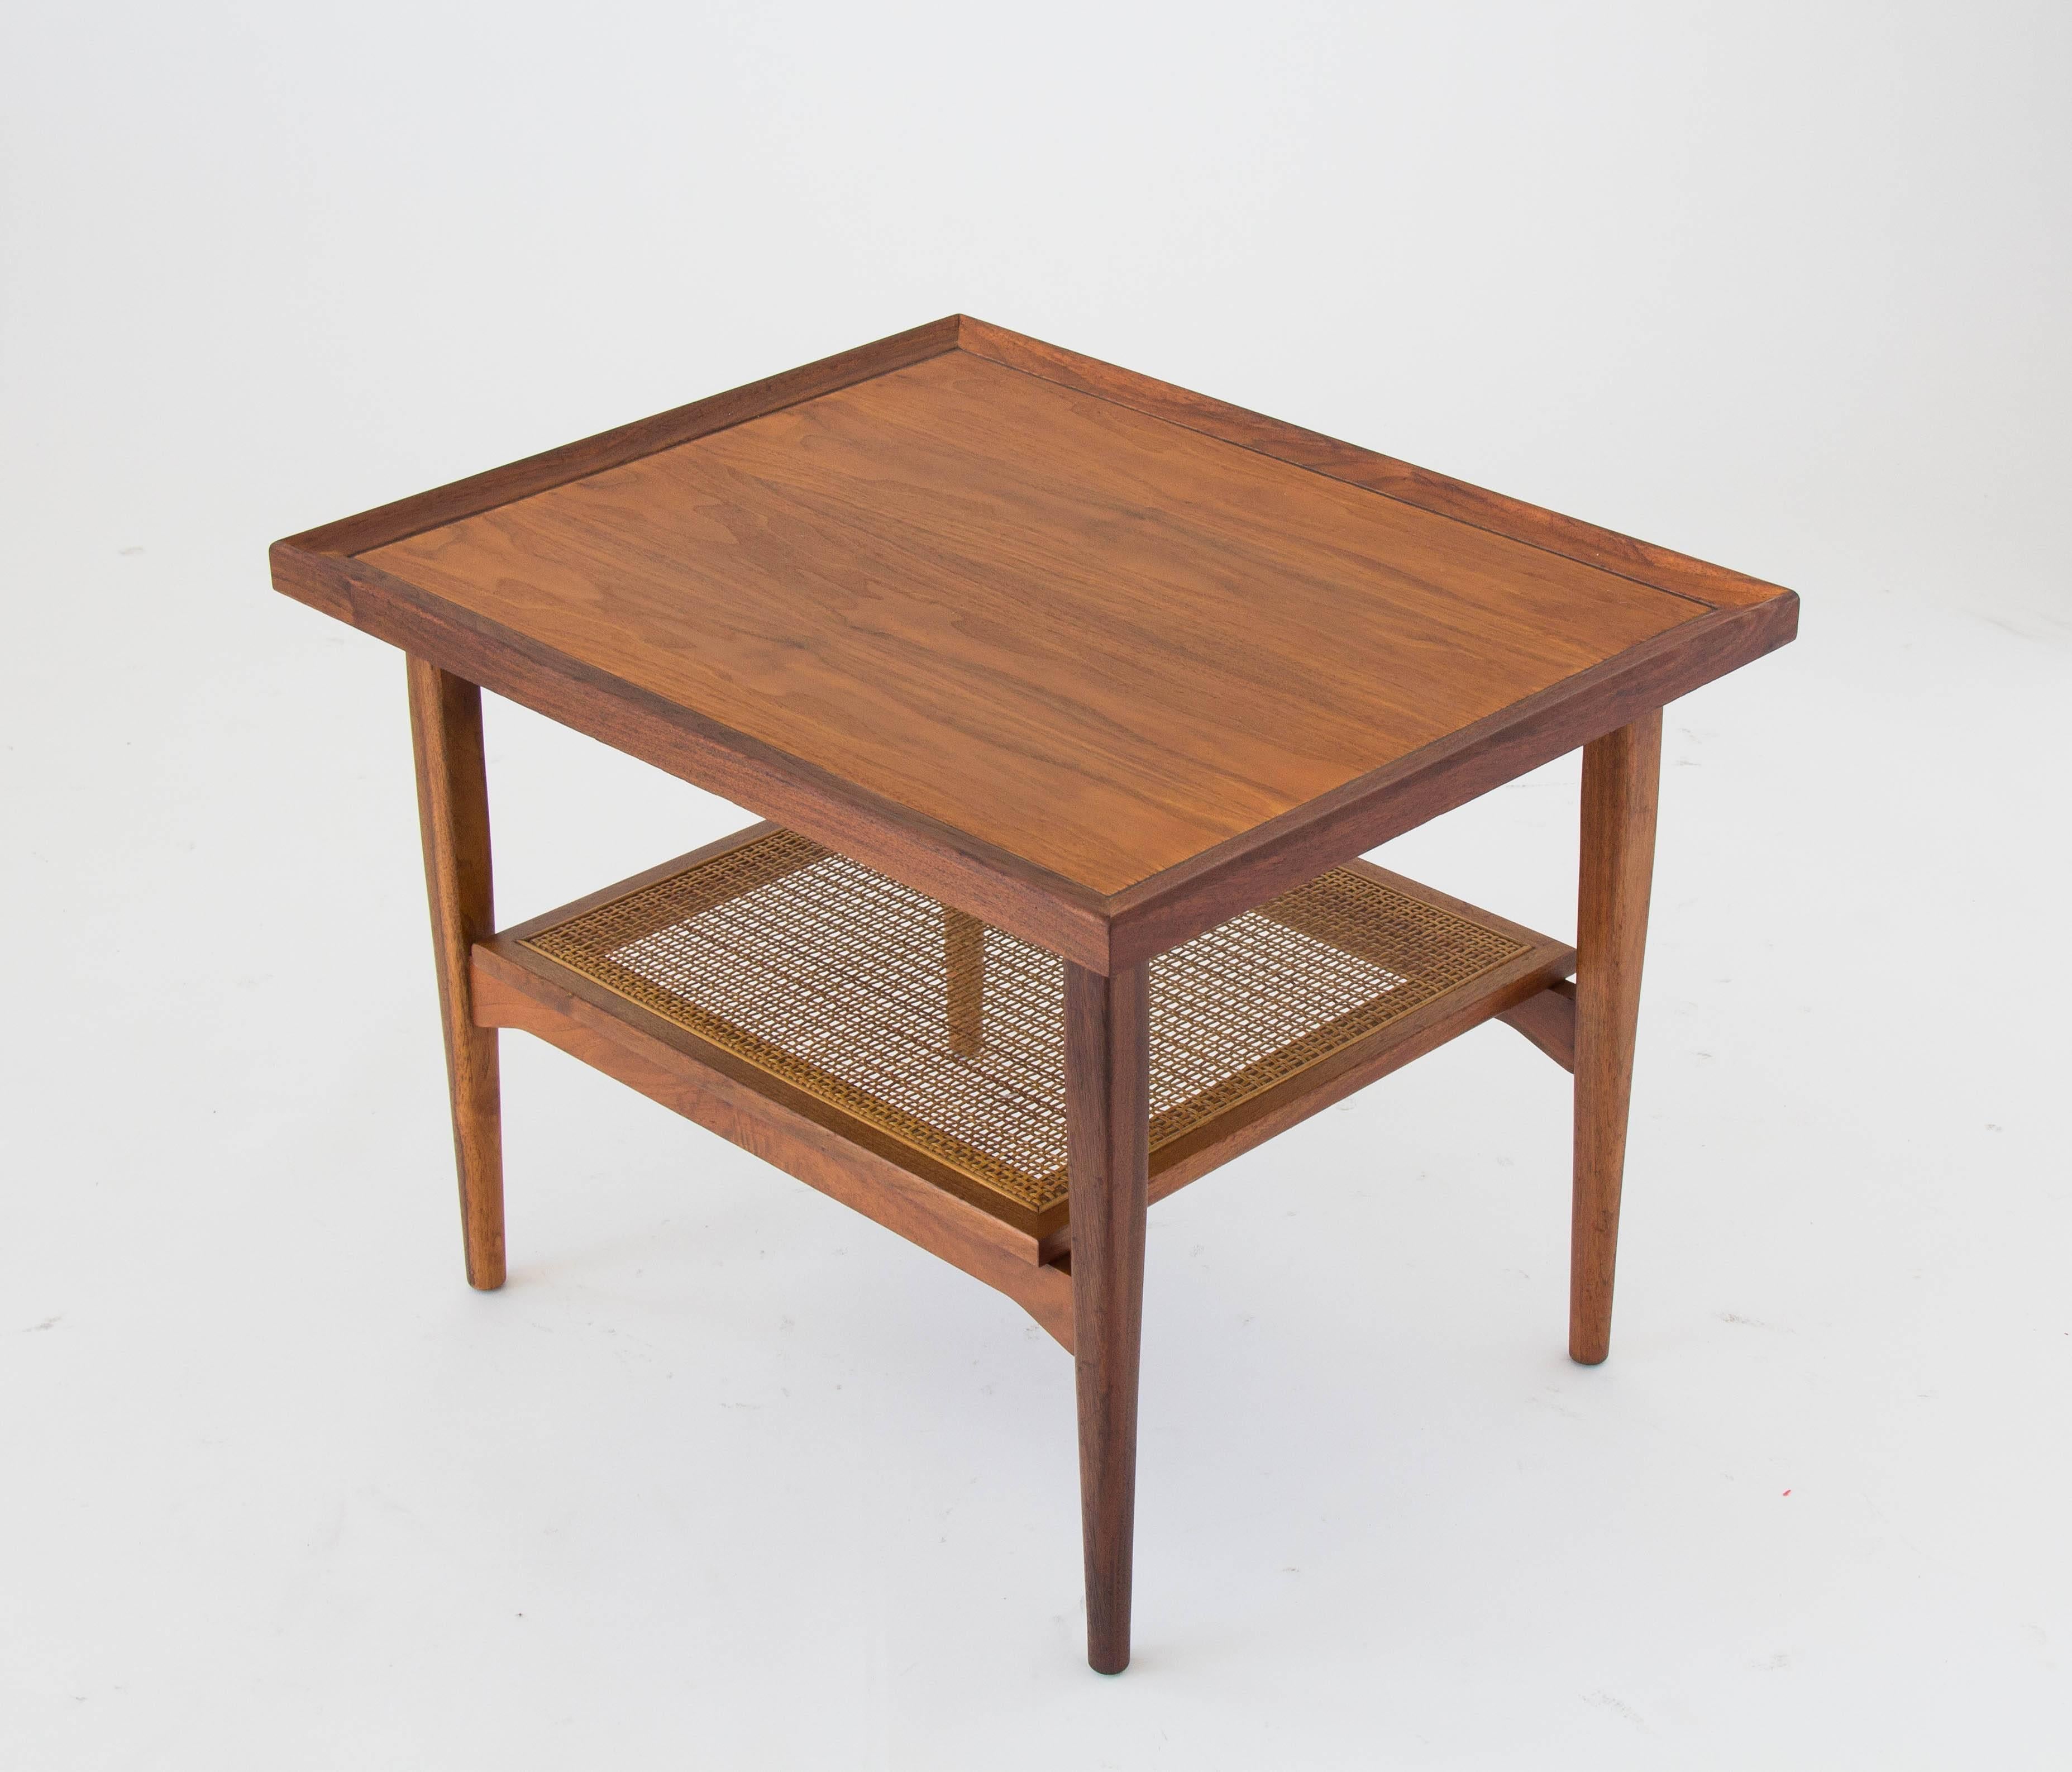 Woven Drexel Declaration Side Table with Cane Shelf